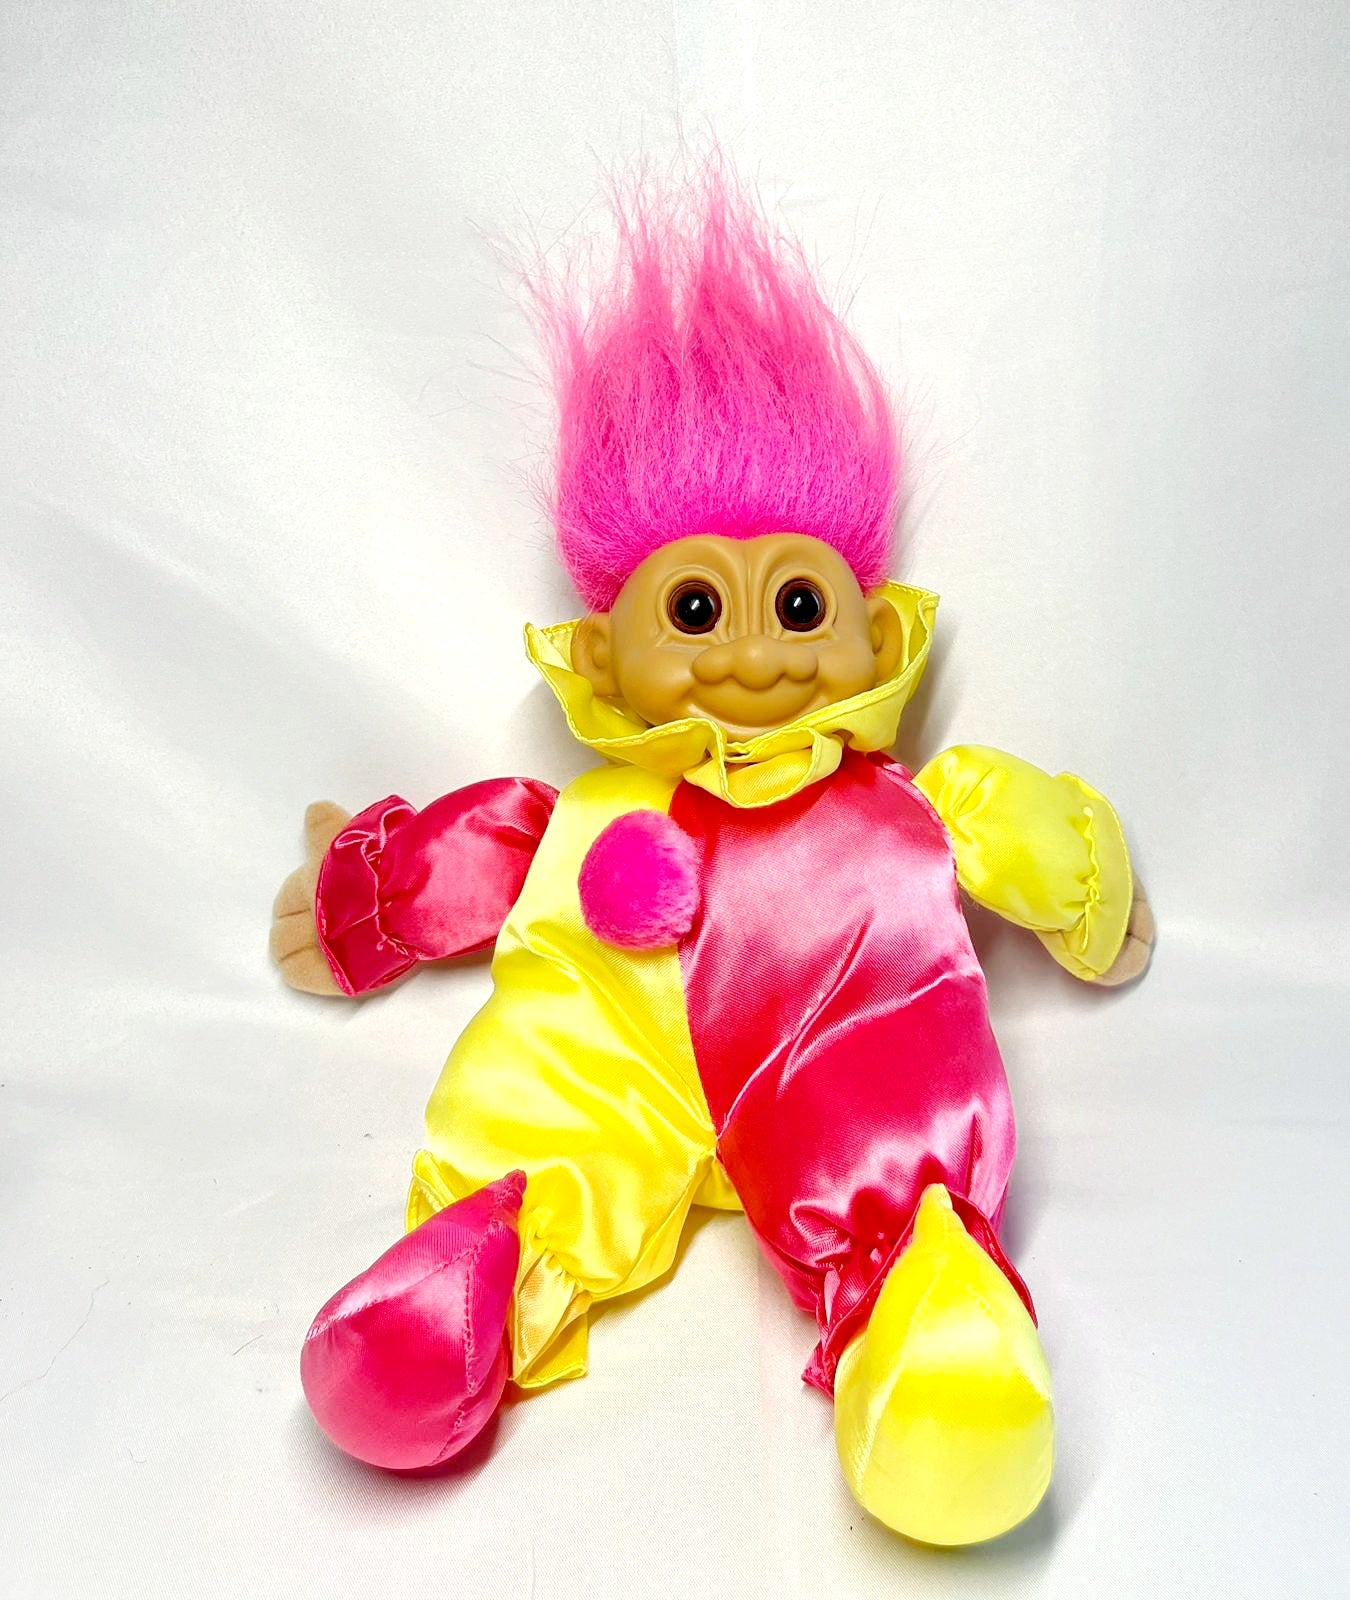 Cute *Vintage Russ Clown Troll Doll, “JESTER” Bright Pink & Yellow 10” Plush Toy